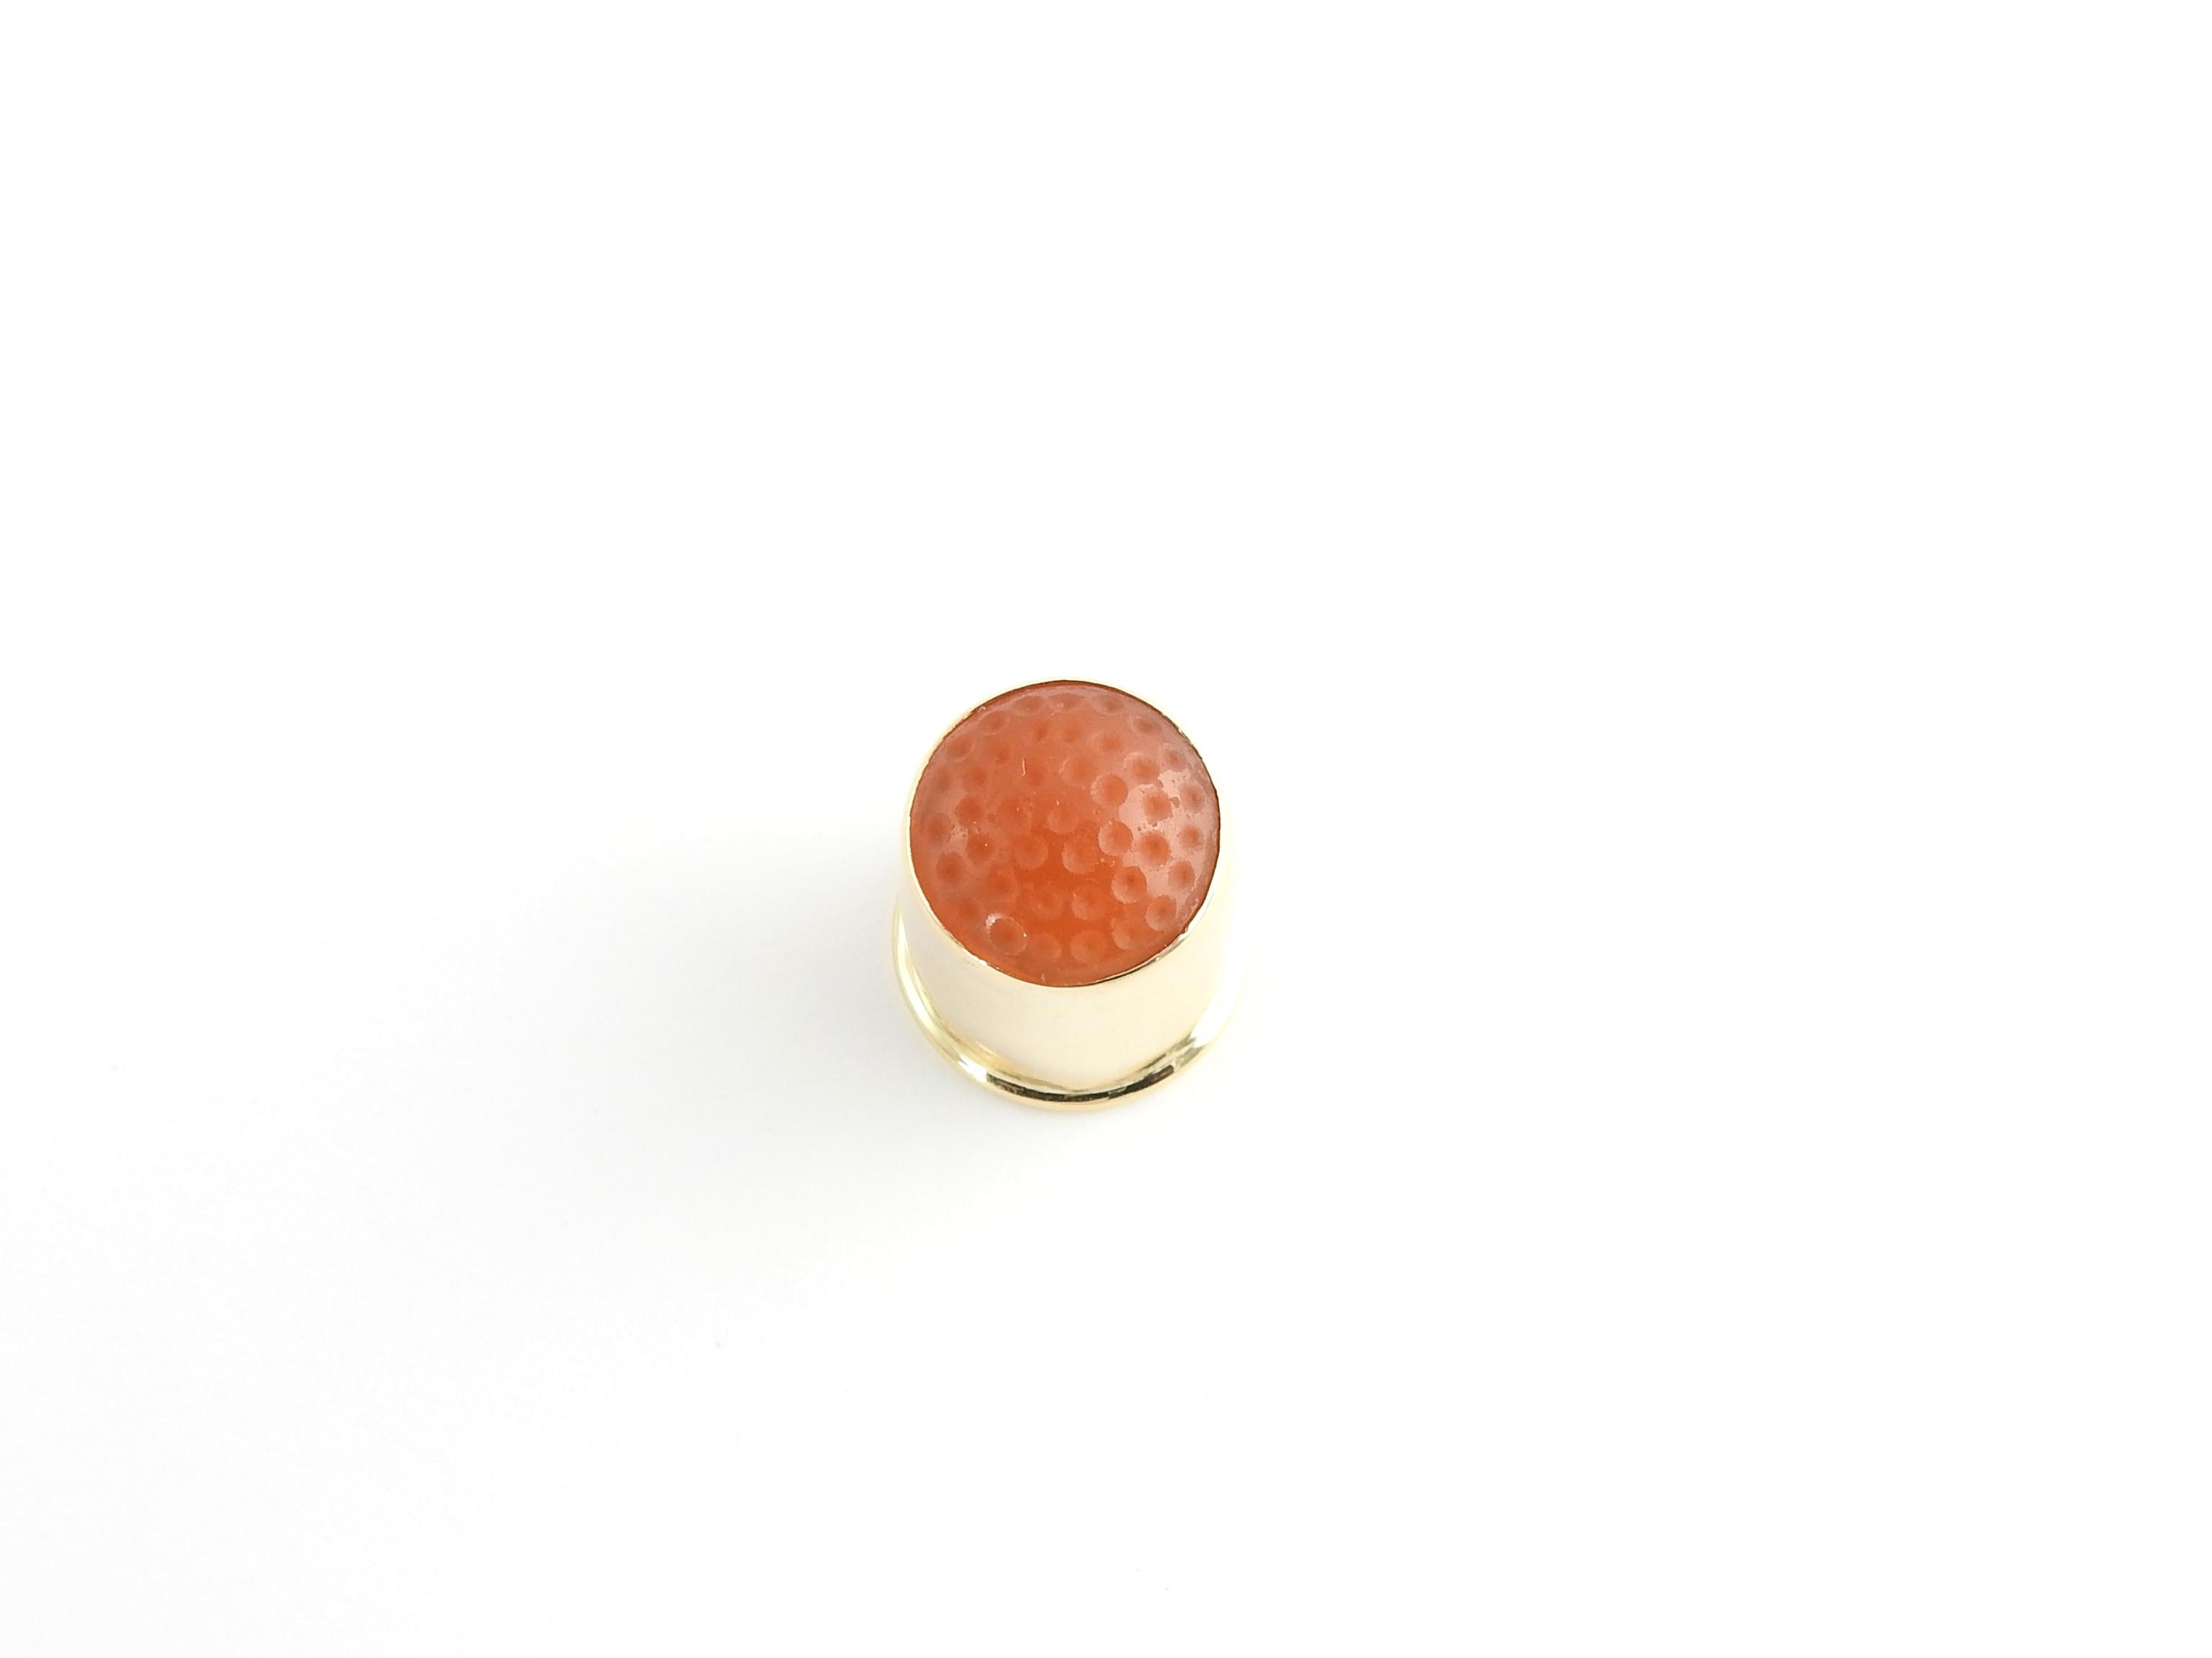 Vintage 18 Karat Yellow Gold and Carnelian Thimble

This elegant thimble is beautifully crafted in 18K yellow gold. Topped with a lovely round carnelian stone.

Size: 22 mm x 17 mm

Weight: 2.7 dwt. / 4.2 gr.

Stamped: 18K

Hallmark: JL

Very good